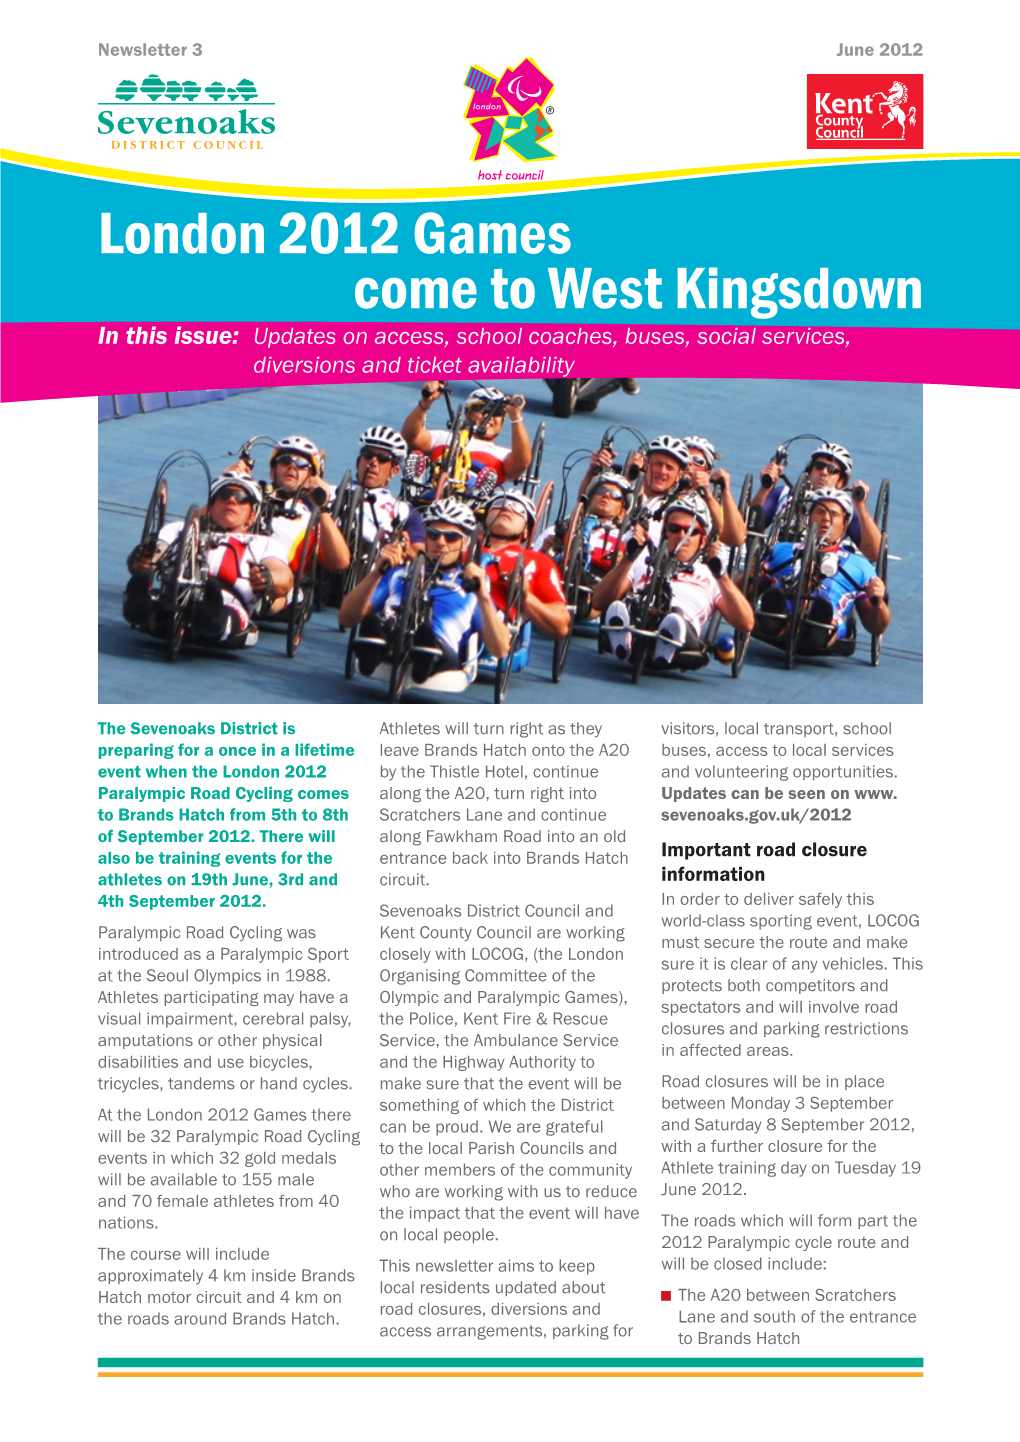 London 2012 Games Come to West Kingsdown in This Issue: Updates on Access, School Coaches, Buses, Social Services, Diversions and Ticket Availability